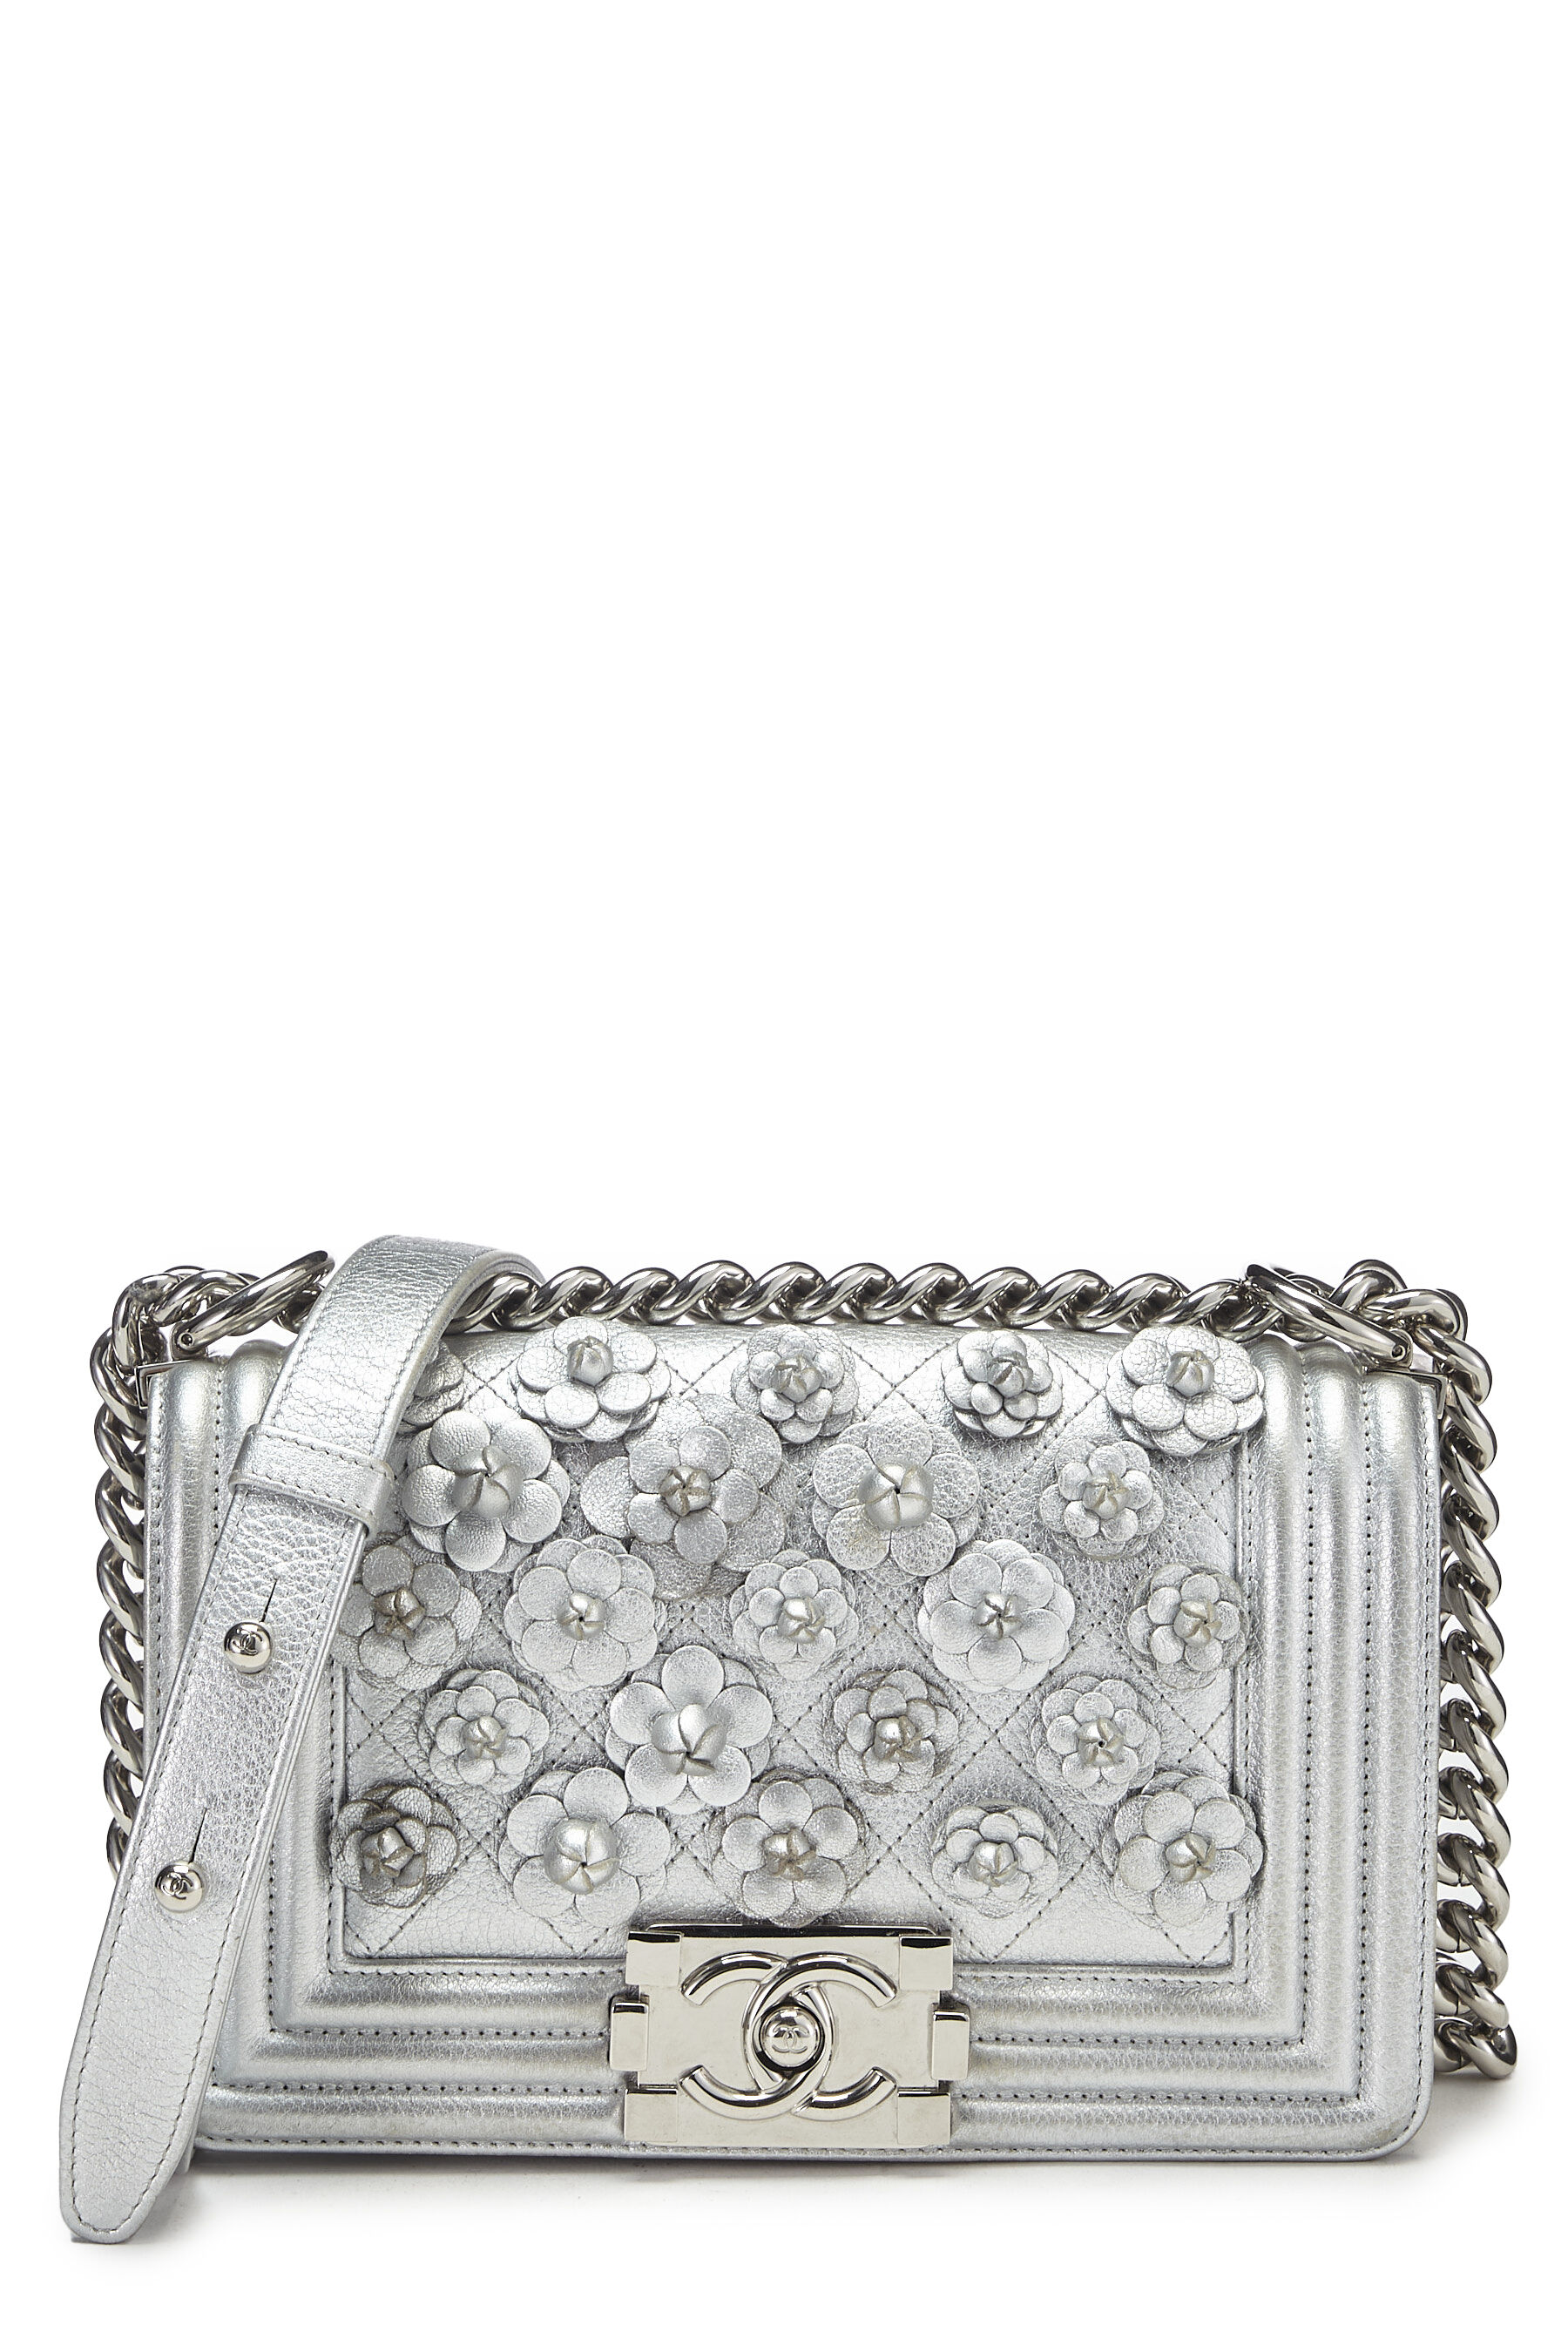 Chanel Silver Quilted Lambskin Camellia Boy Bag Small Q6B4IL1IVH000